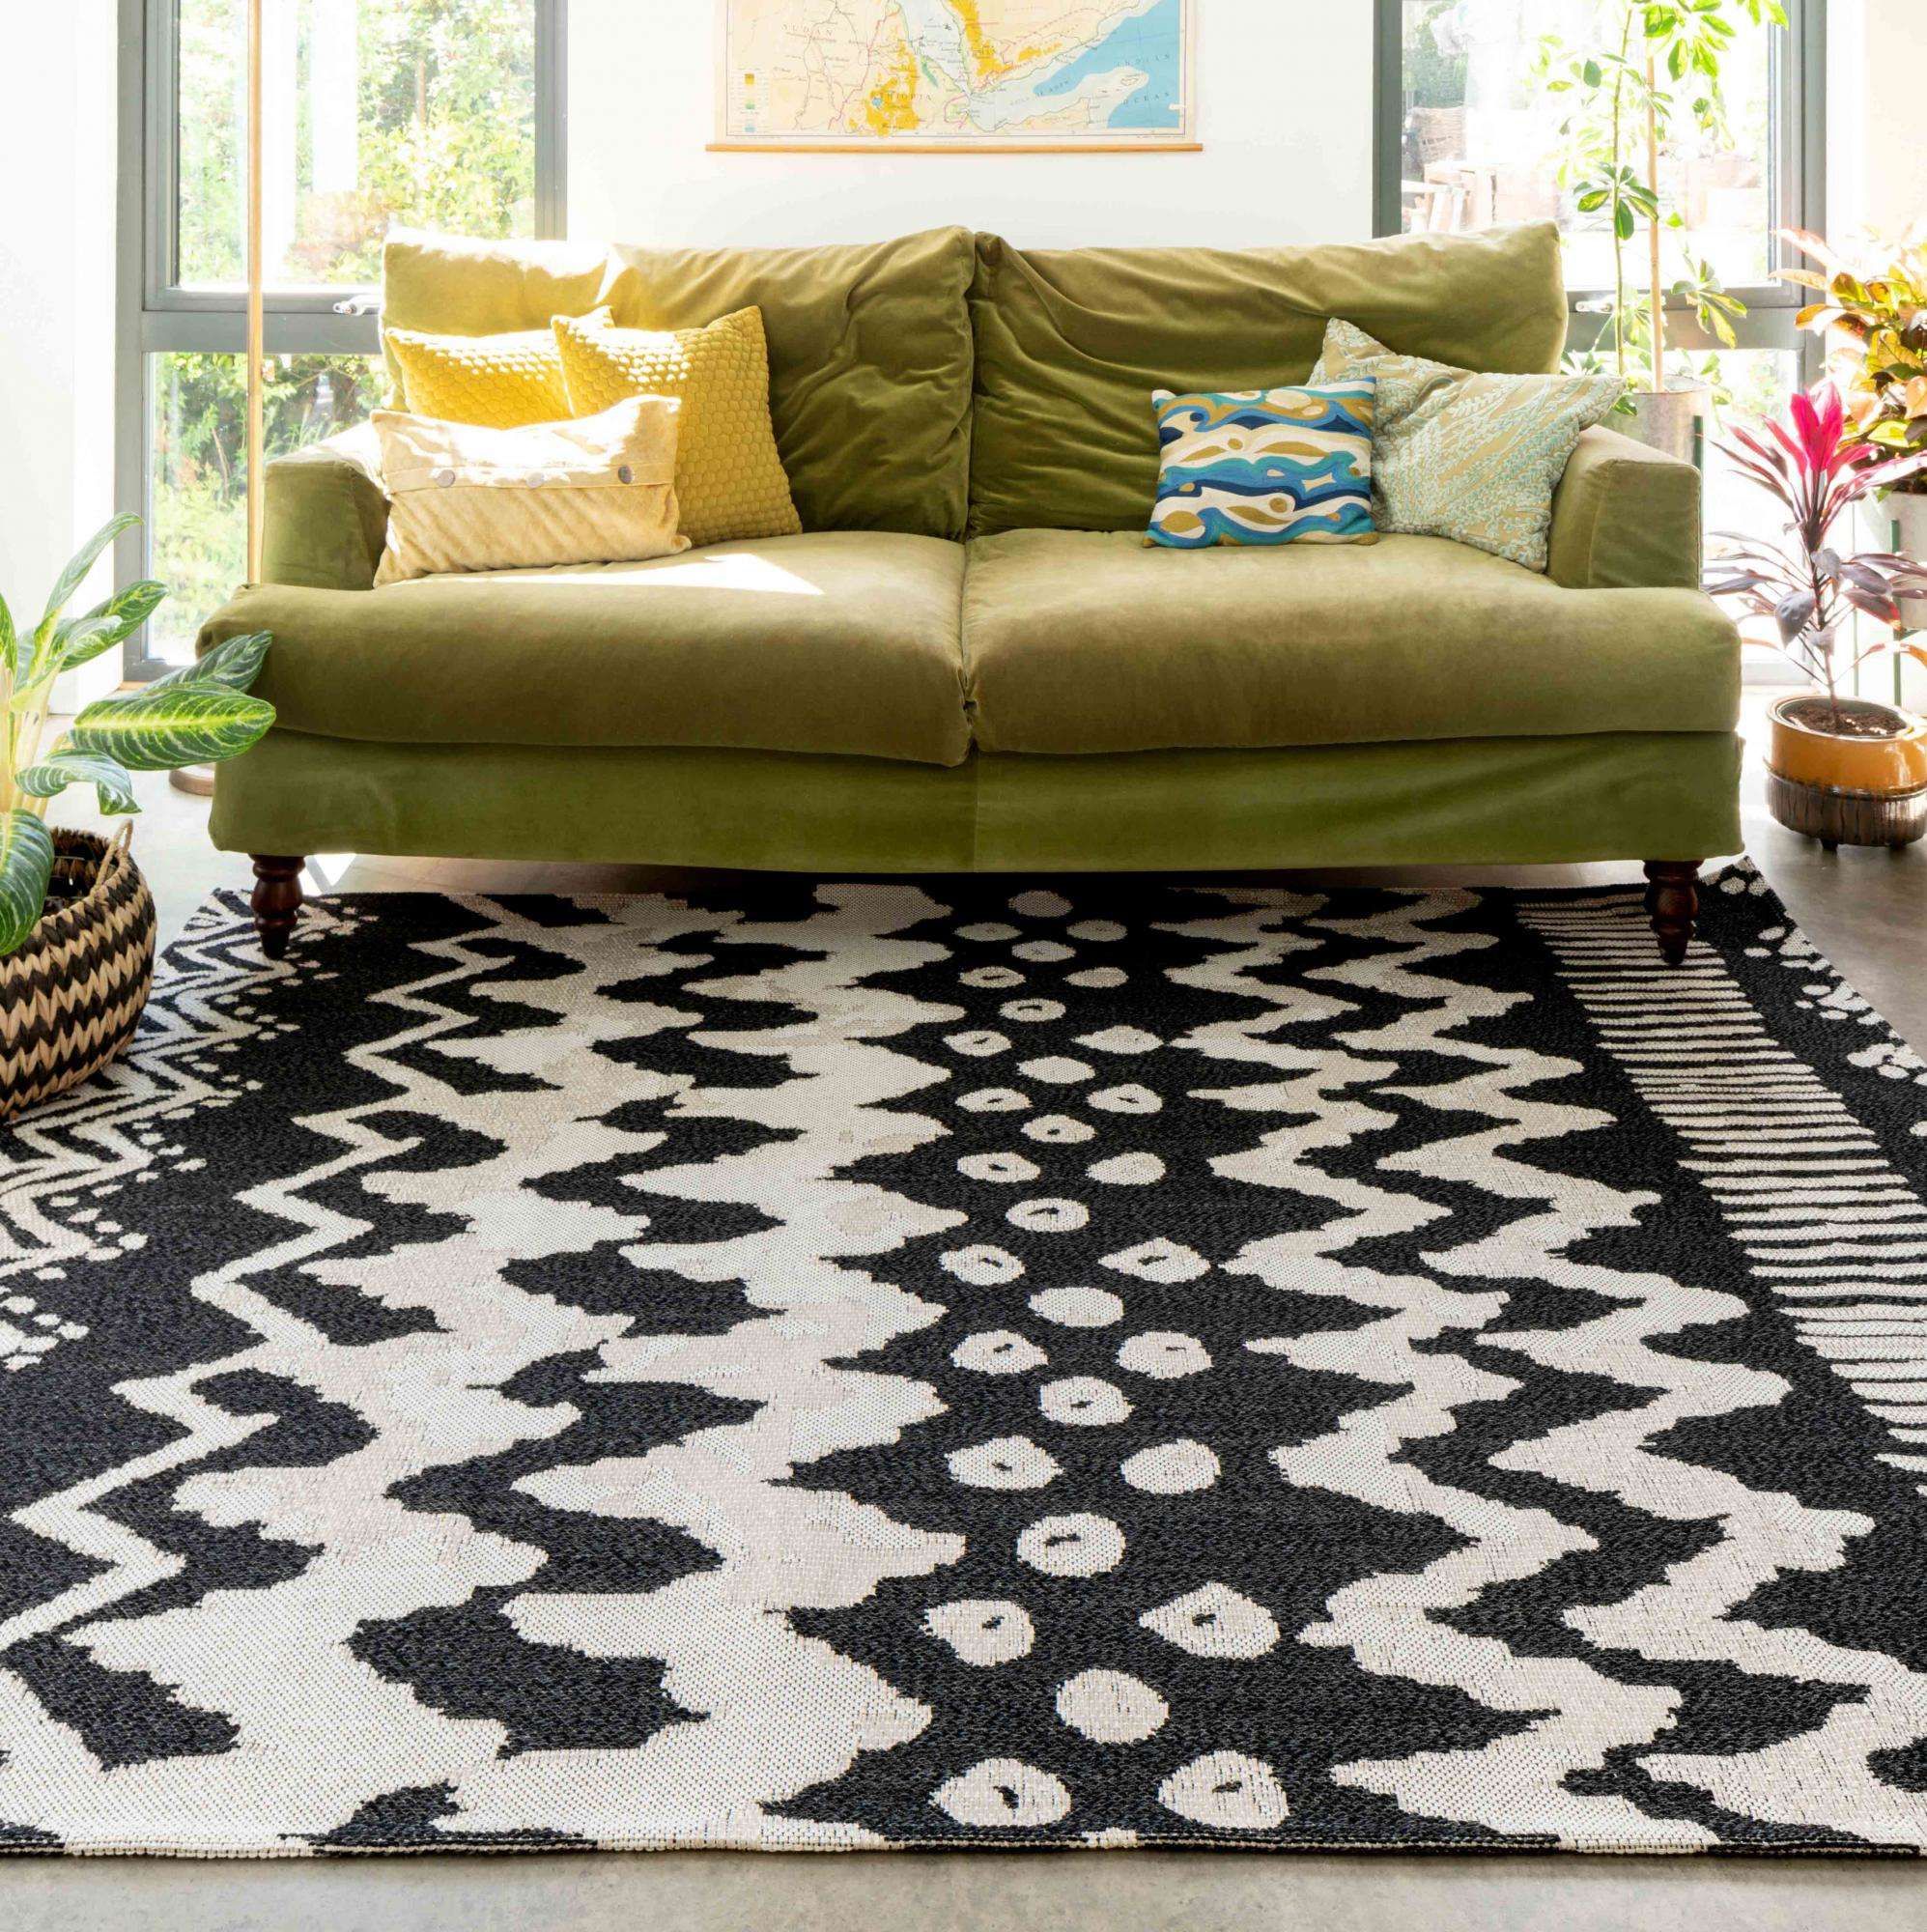 Rustic Chic Black White Woven Sustainable Recycled Cotton Rug | Kendall |  Kukoon Rugs Online Throughout Black And White Rugs (Photo 8 of 15)